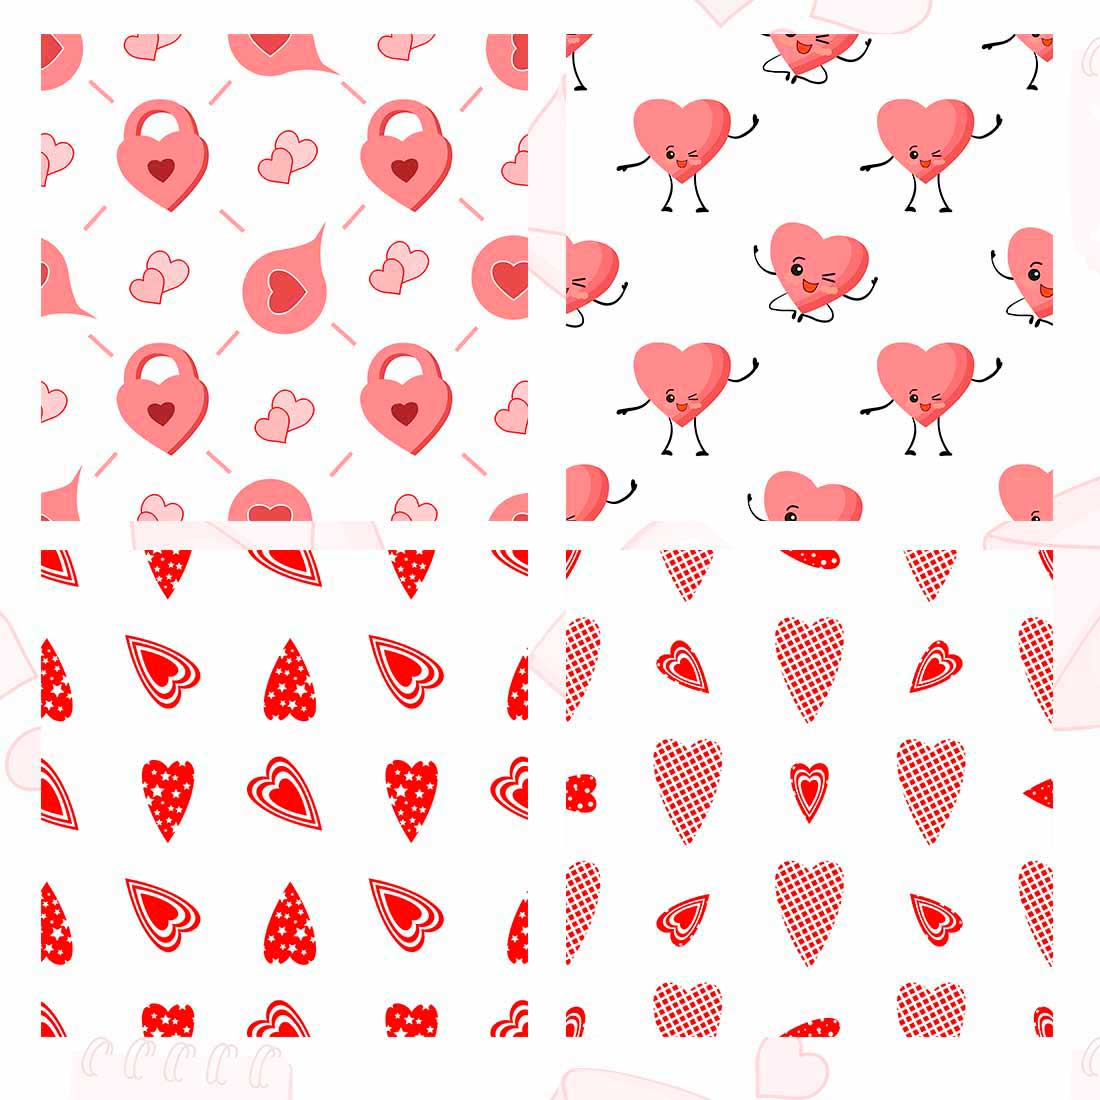 Collection of images of wonderful patterns with hearts.